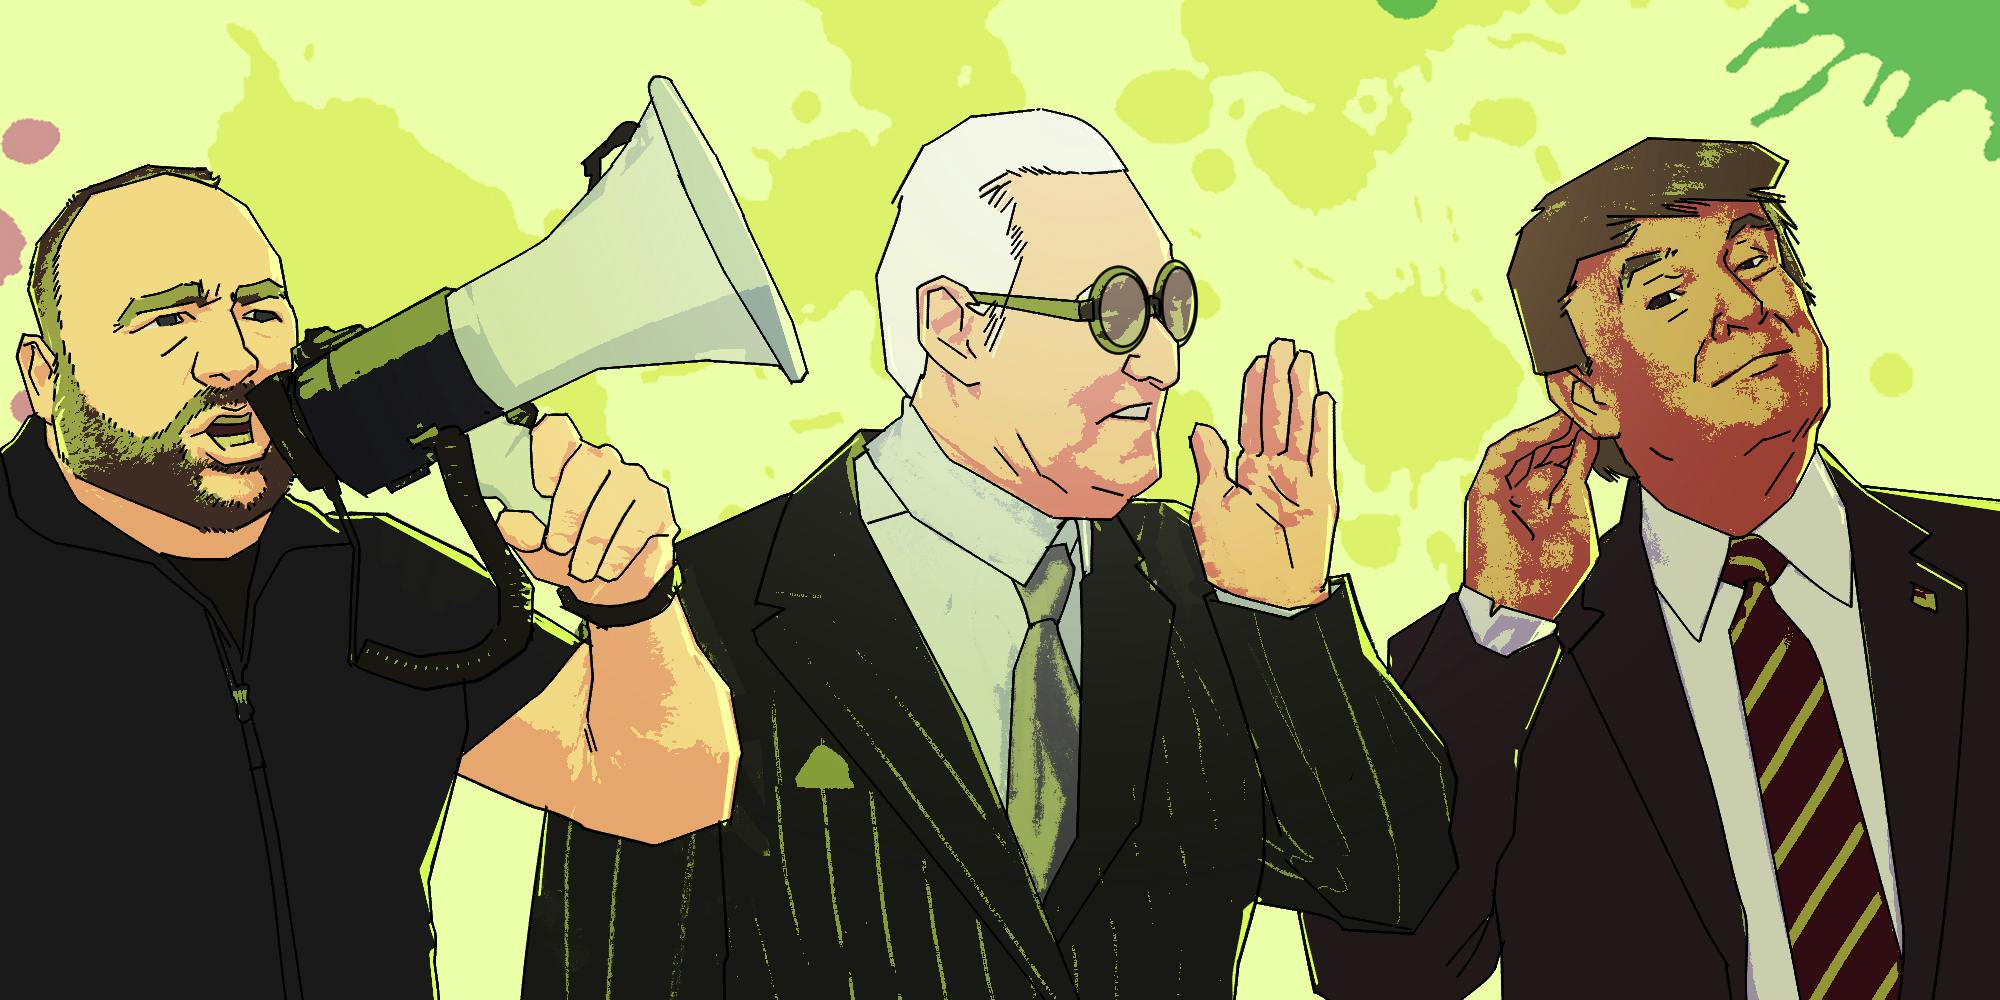 illustration of alex jones with a megaphone, rogerstone whispering into trump's ear